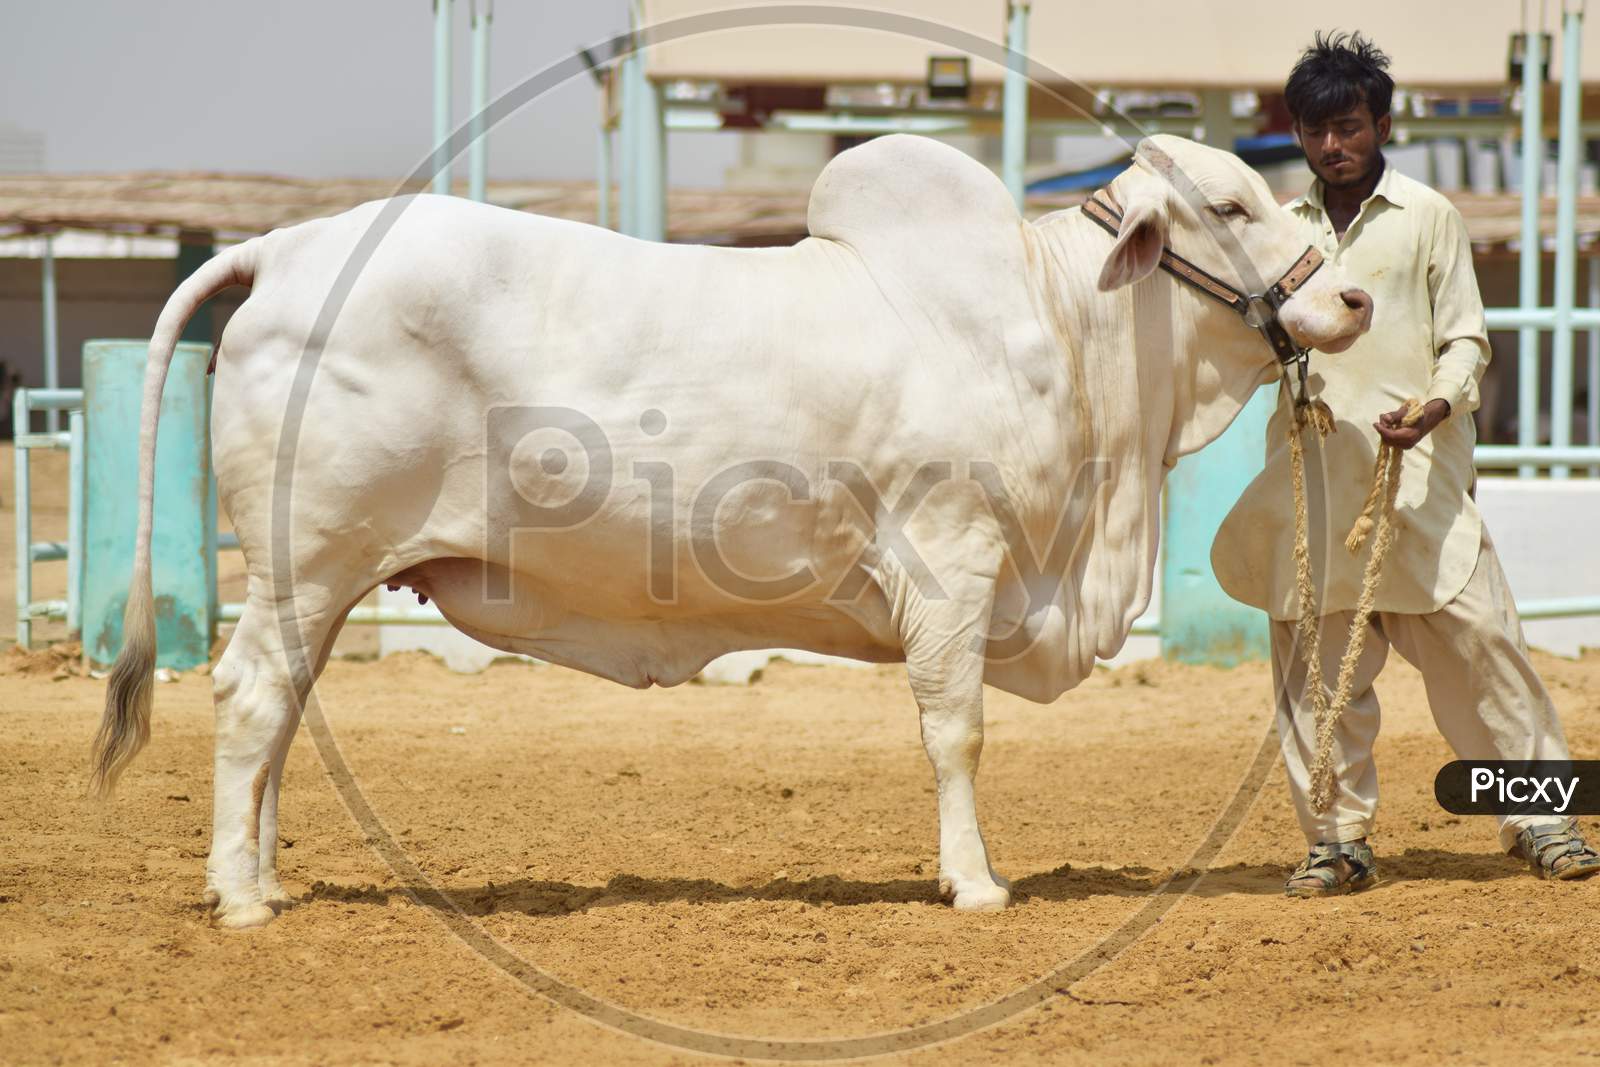 A Man with White Bull in Cattle Farm